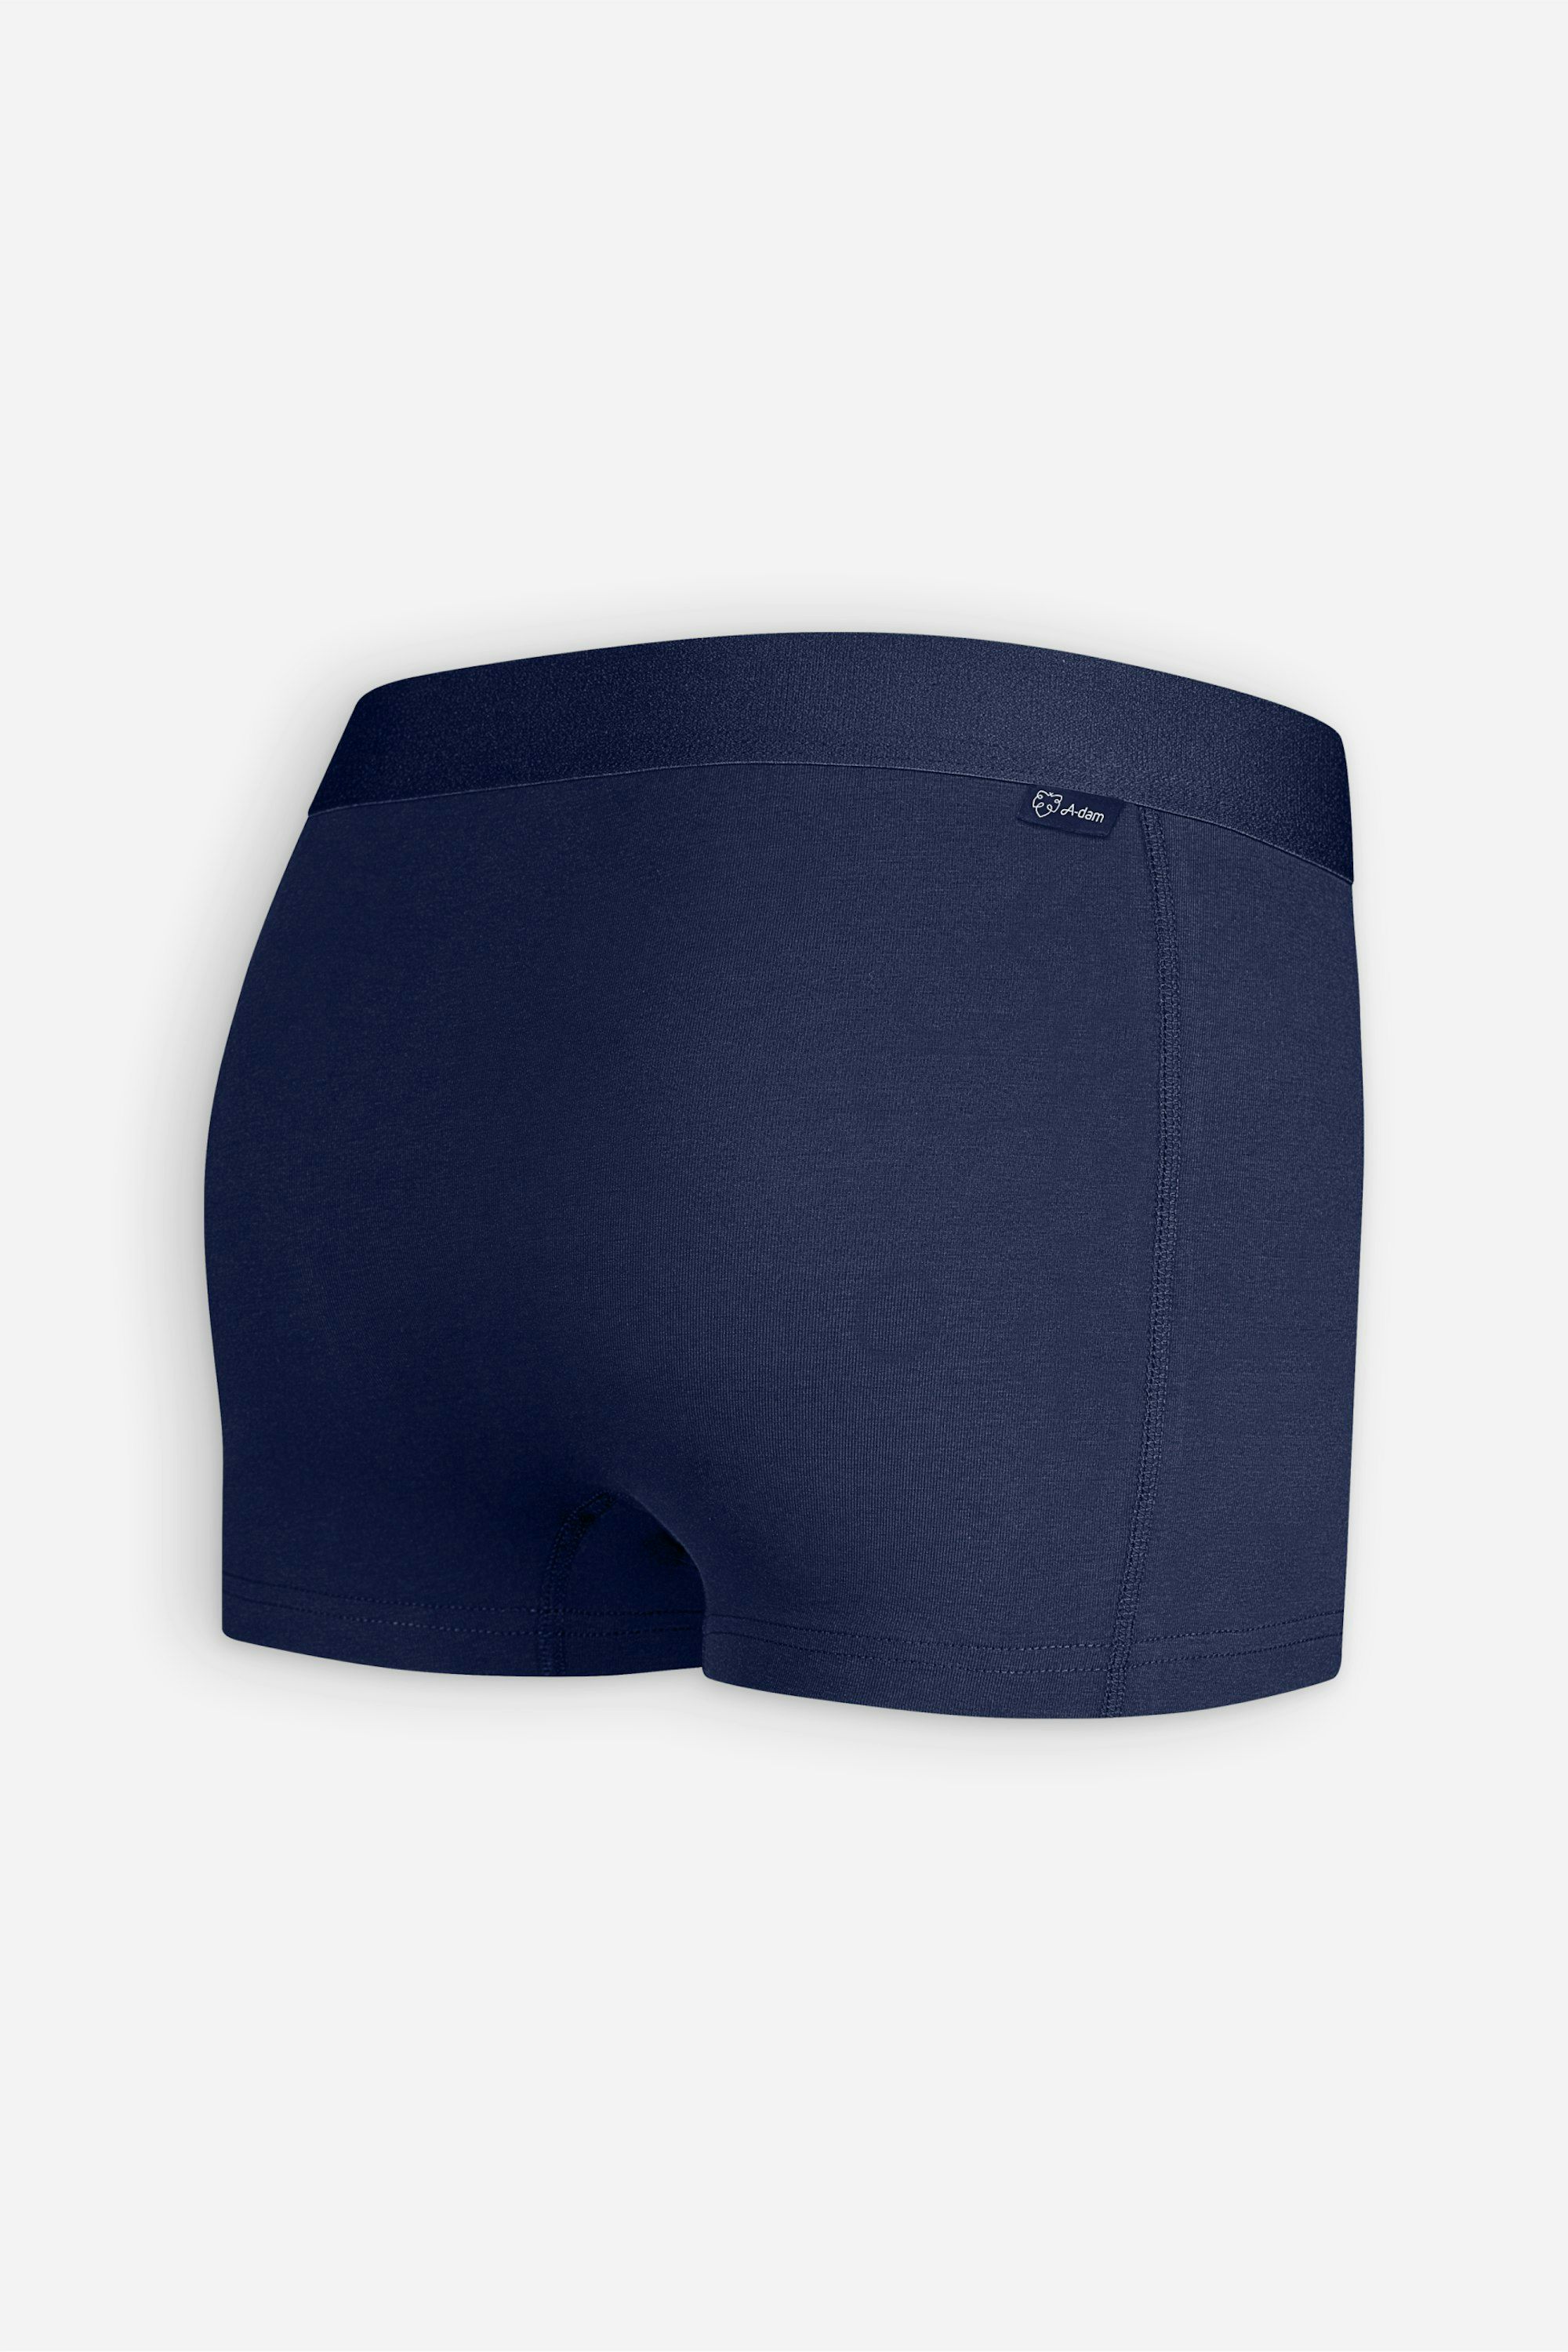 6xSolid Navy Trunks